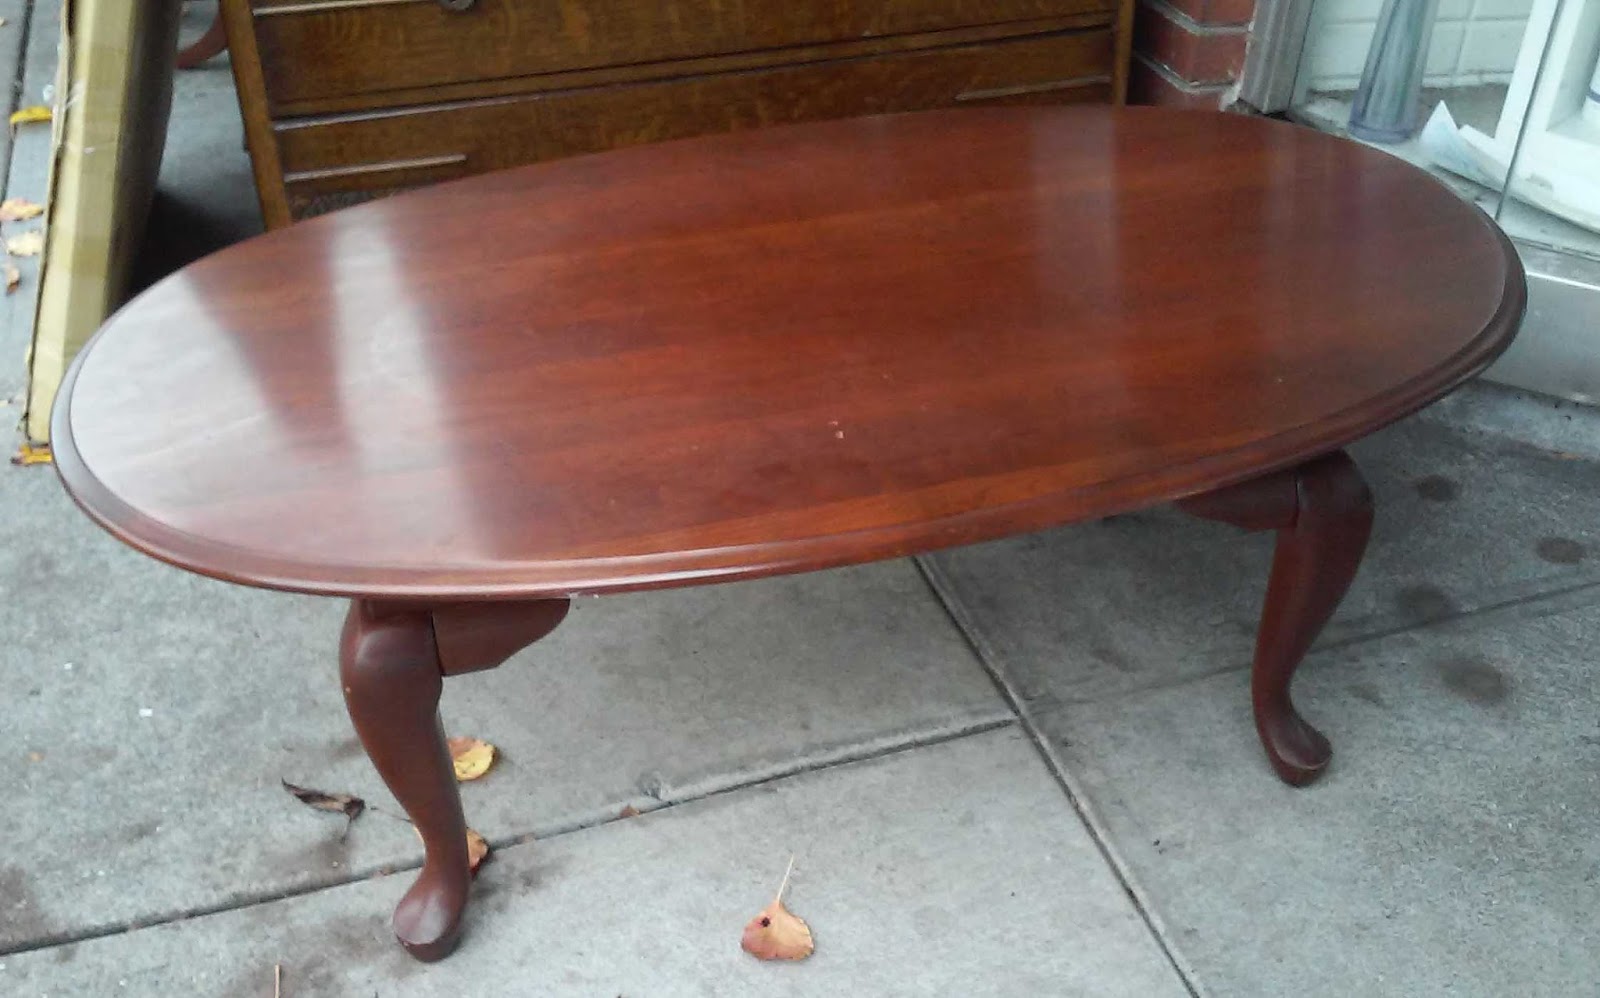 UHURU FURNITURE & COLLECTIBLES: SOLD Coffee Table with Cabriole Legs - $50